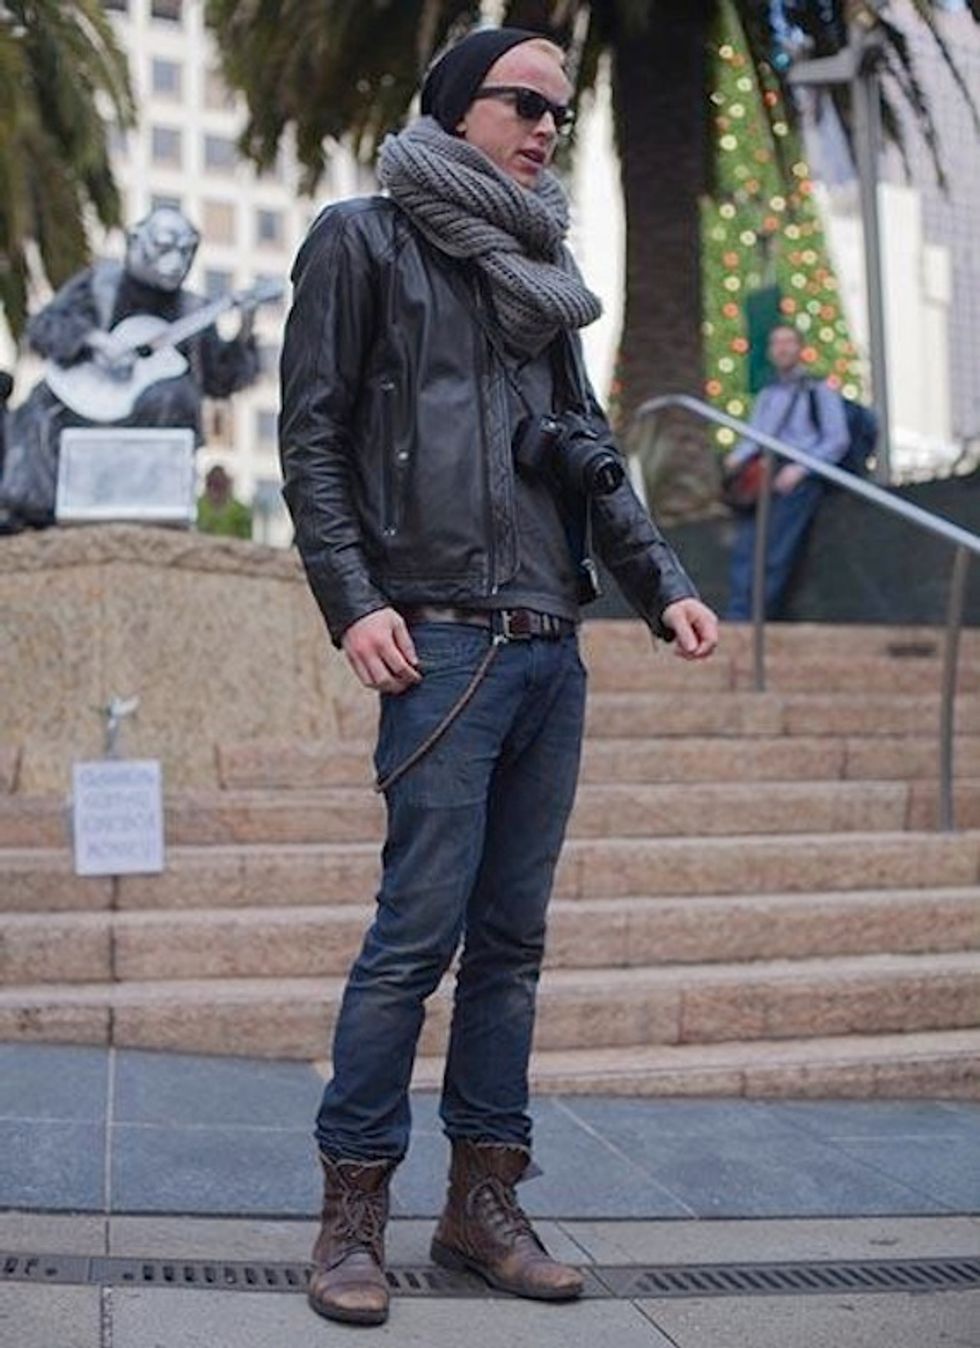 Street Style Report: A German Tourist in Union Square